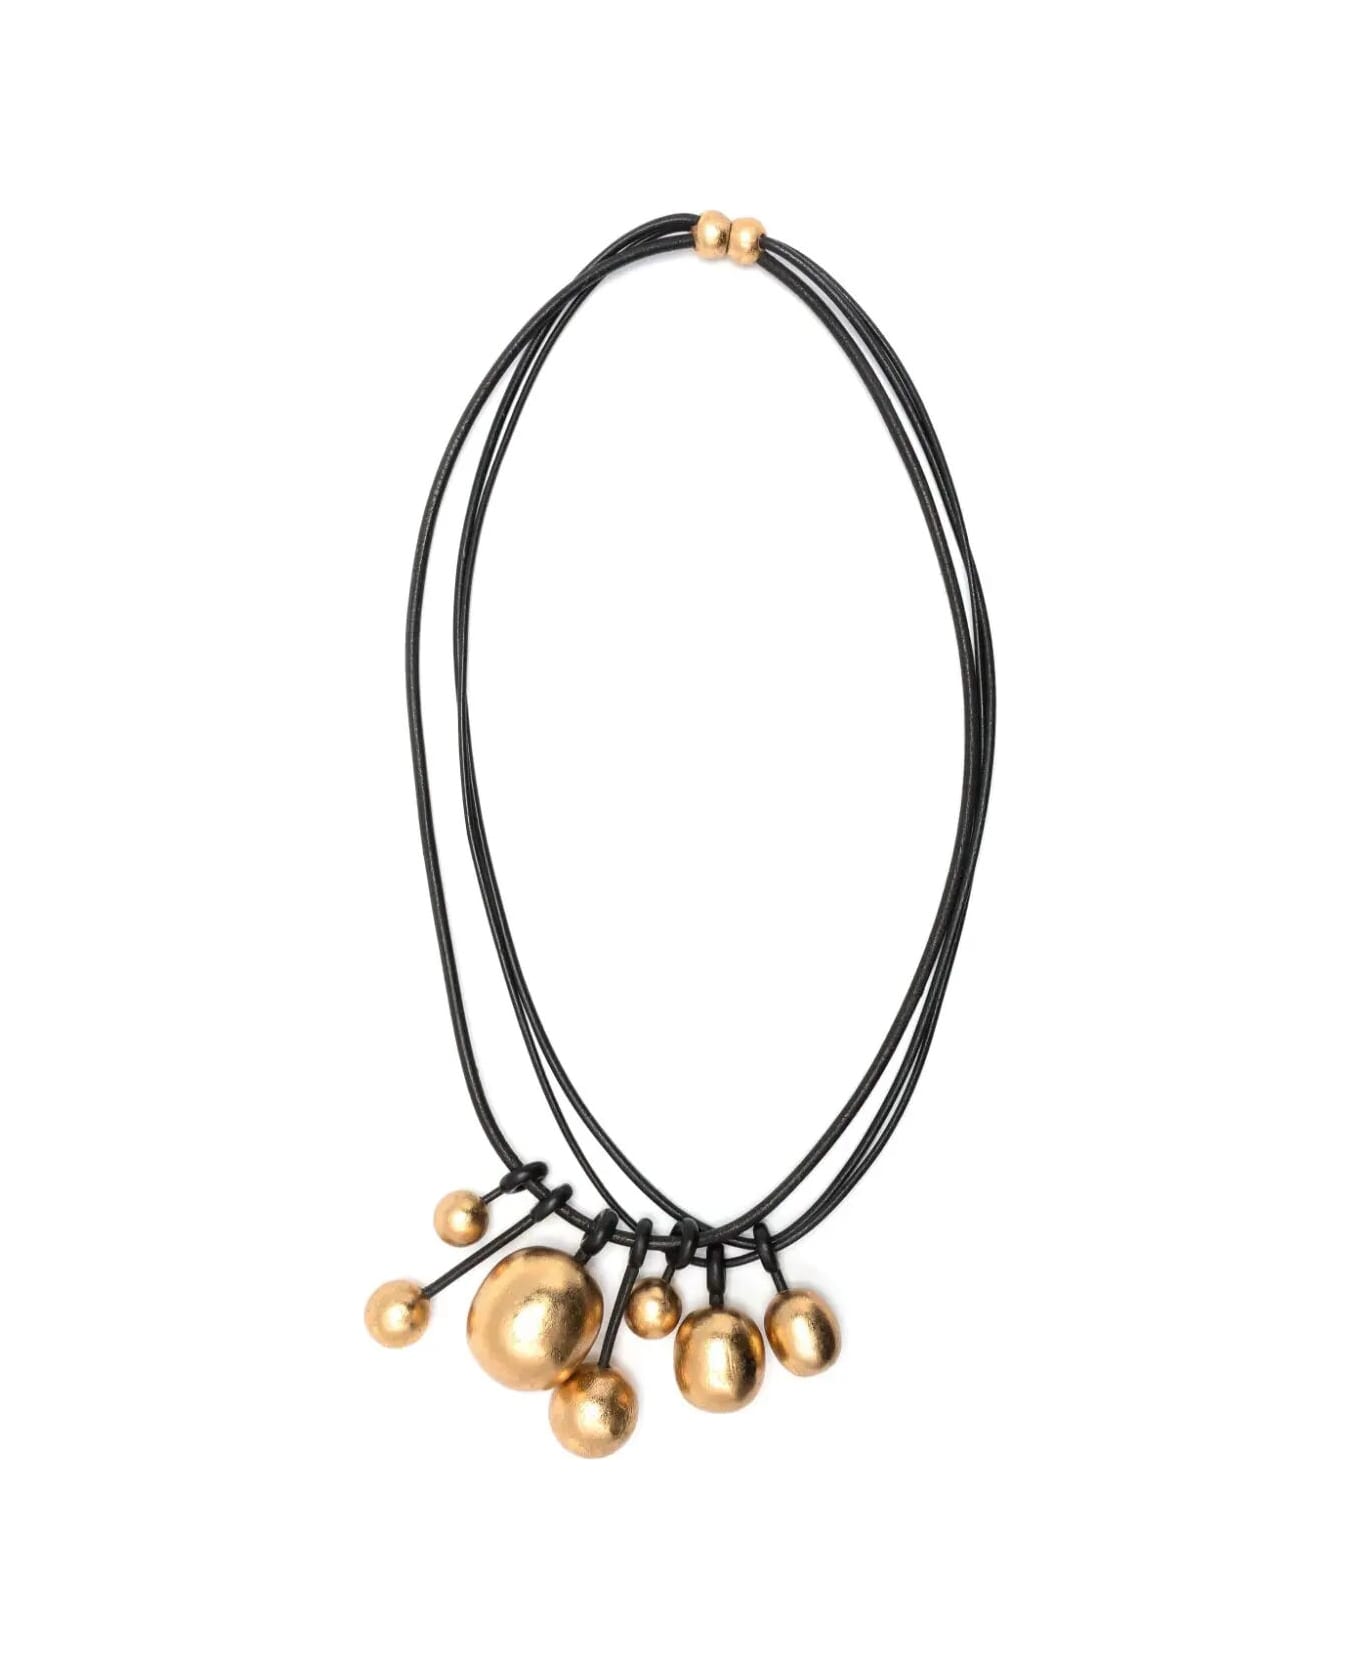 Monies Salix Necklace - Black And Gold ネックレス